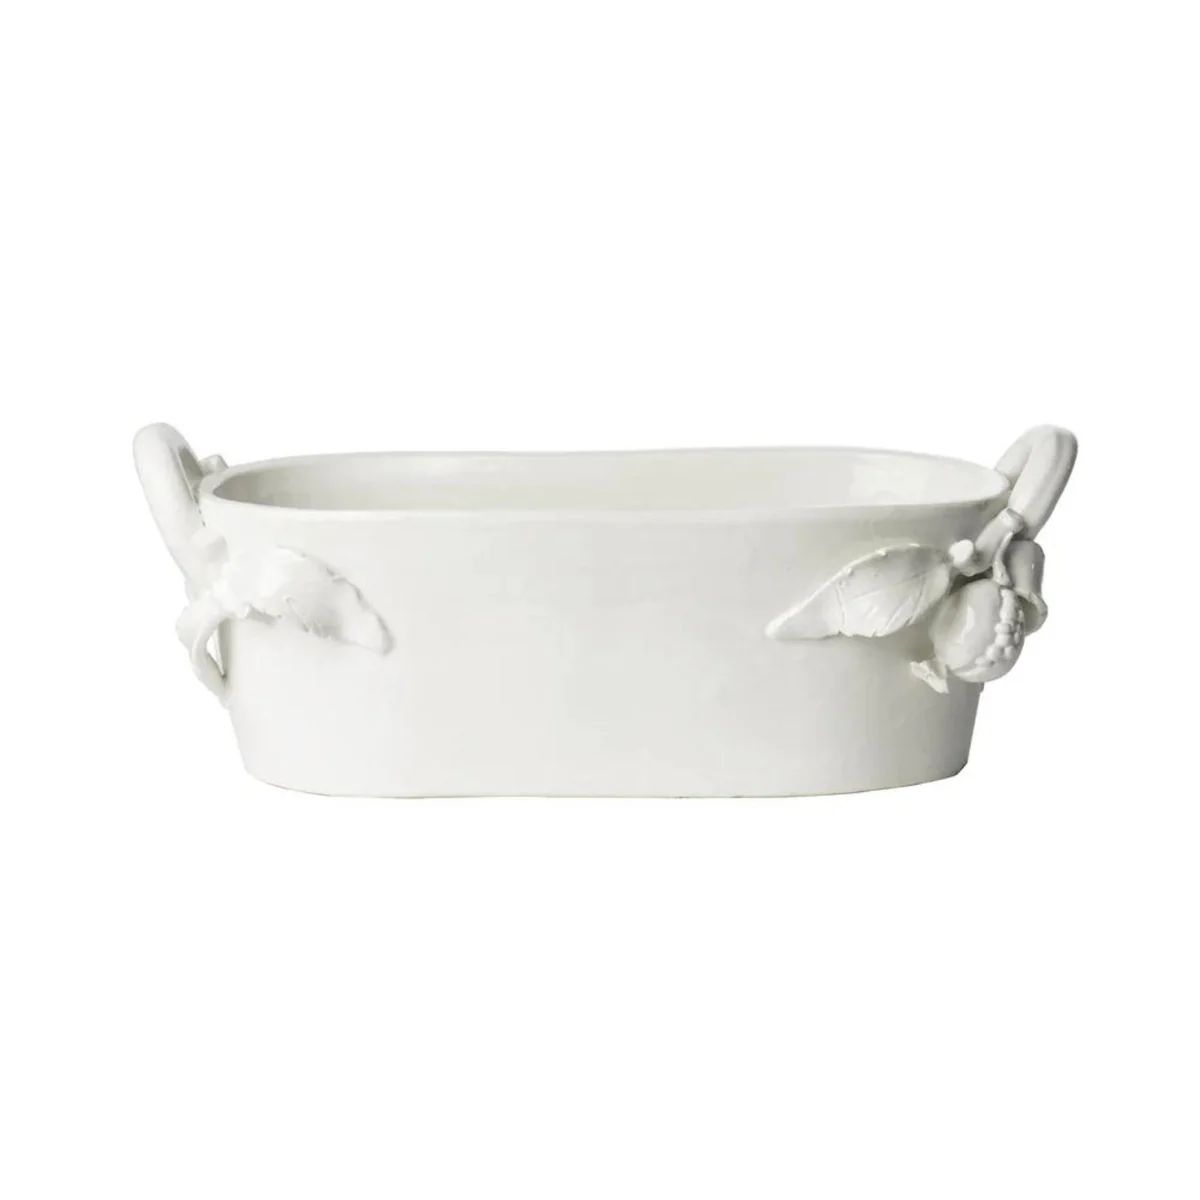 Italian White Ceramic Pomegranate Centerpiece Bowl | The Well Appointed House, LLC